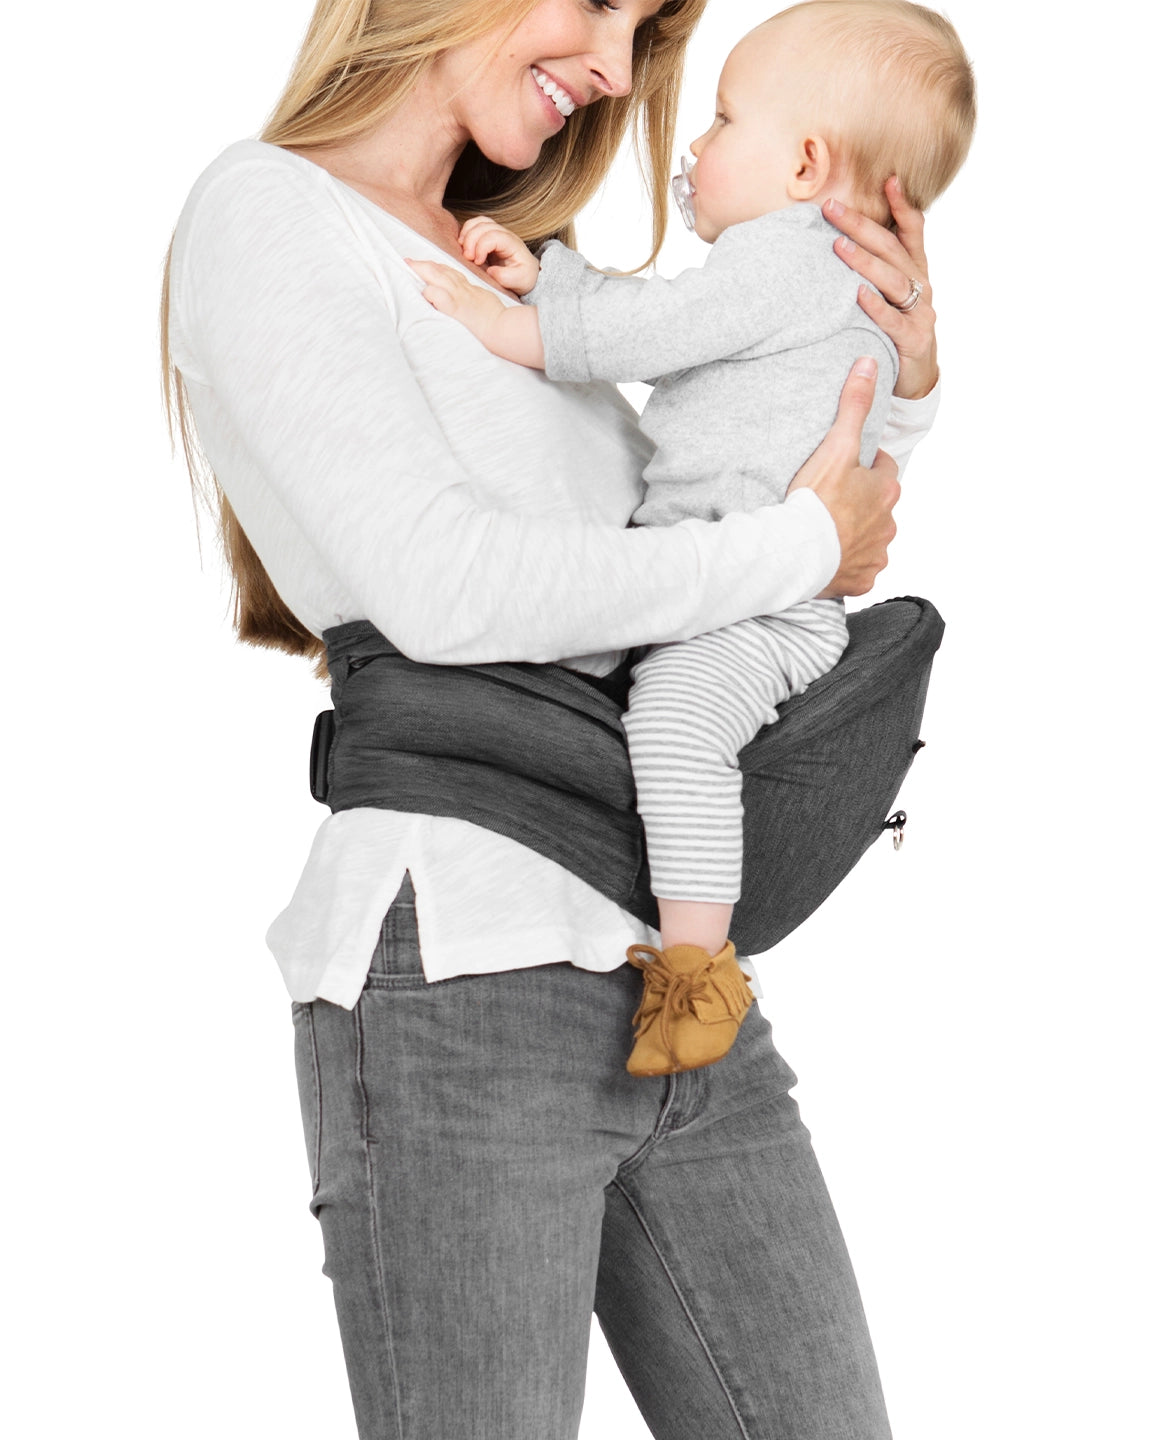 mom holding baby while wearing the hip seat carrier